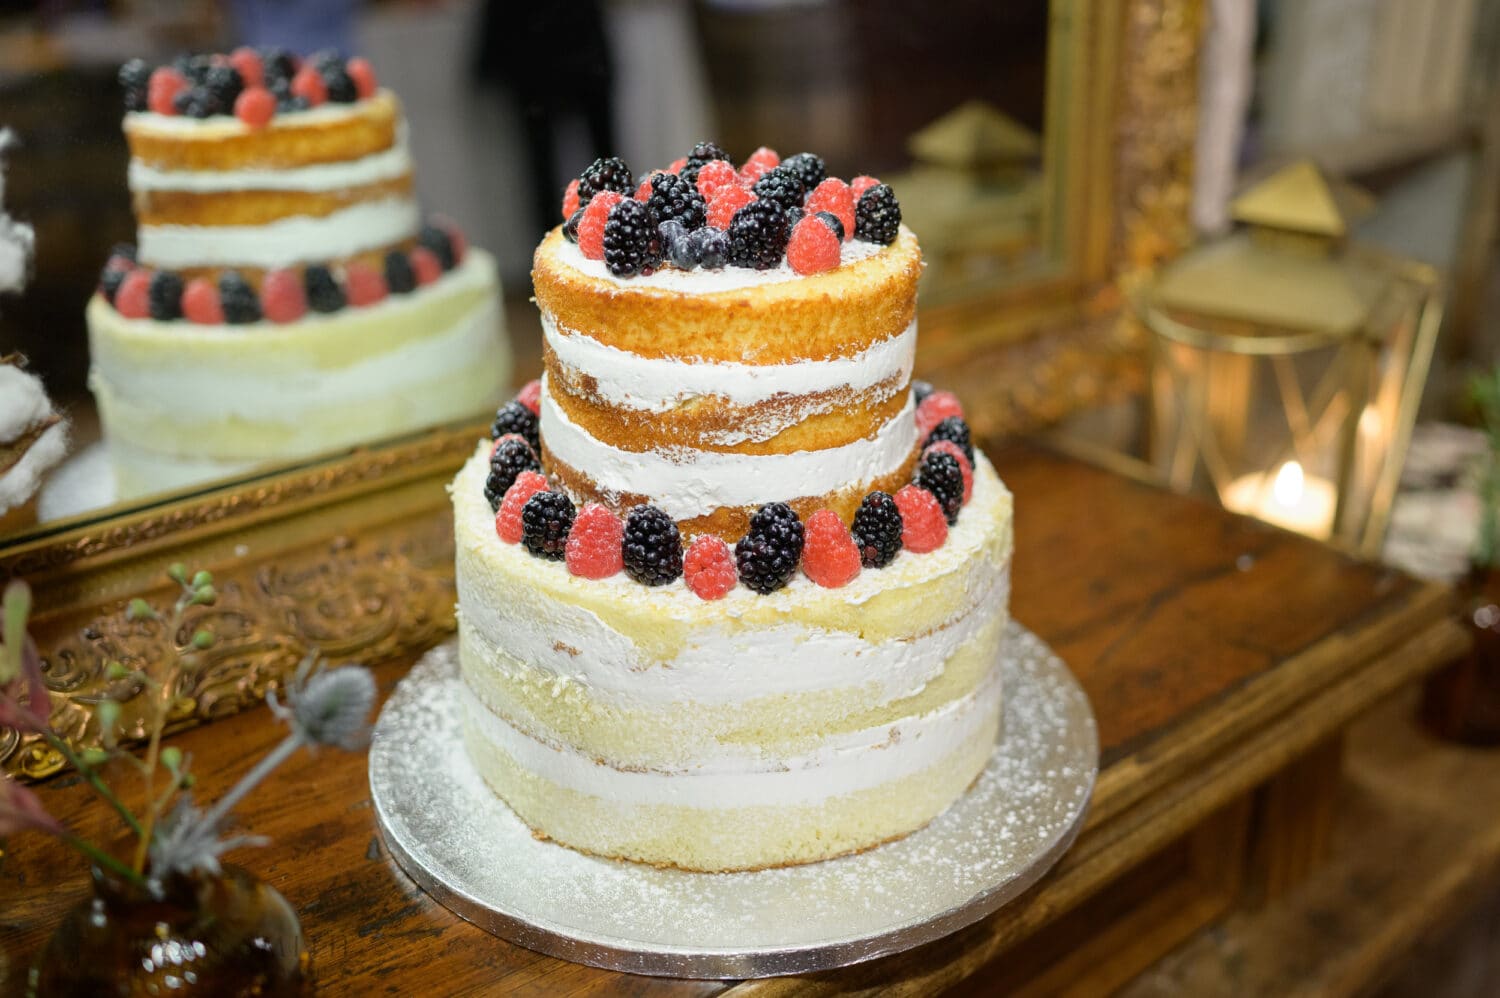 Cake details - The Cooper House